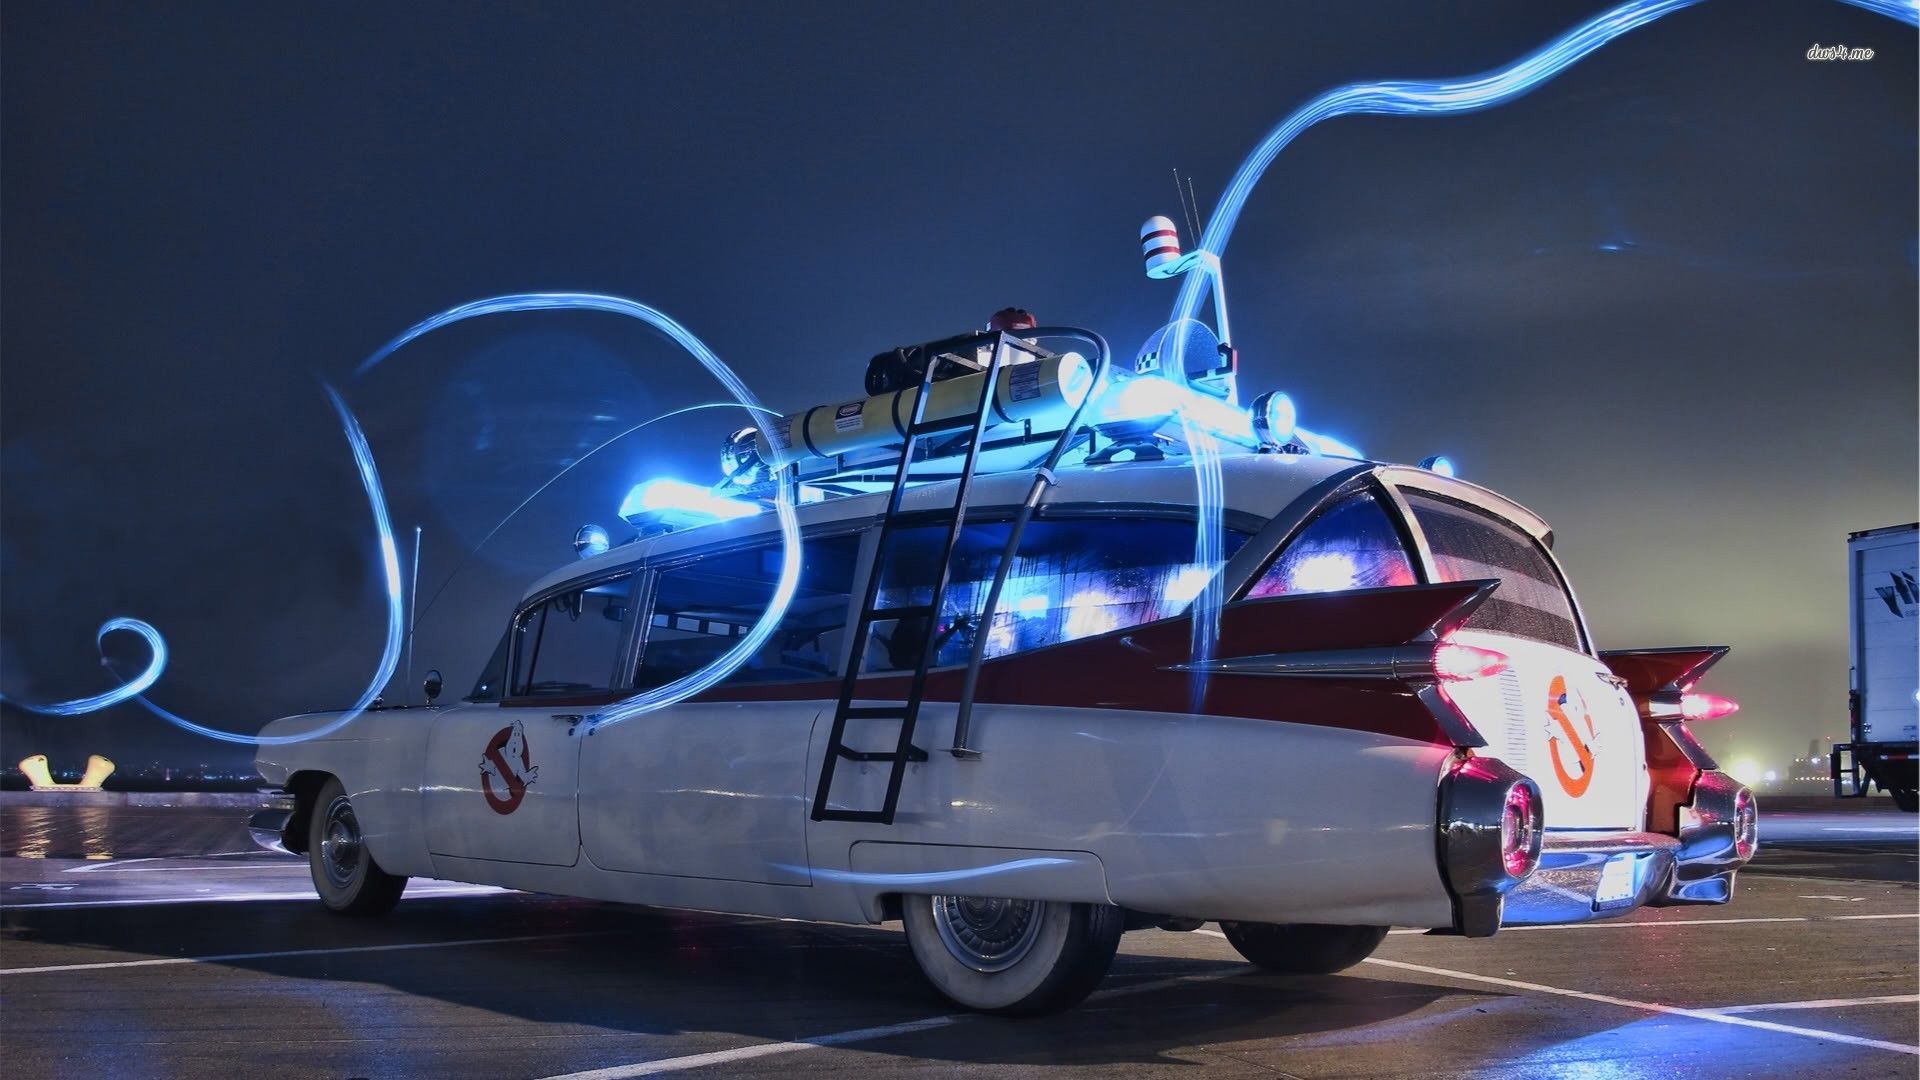 Ghostbusters car wallpaper - Movie wallpapers - #10116